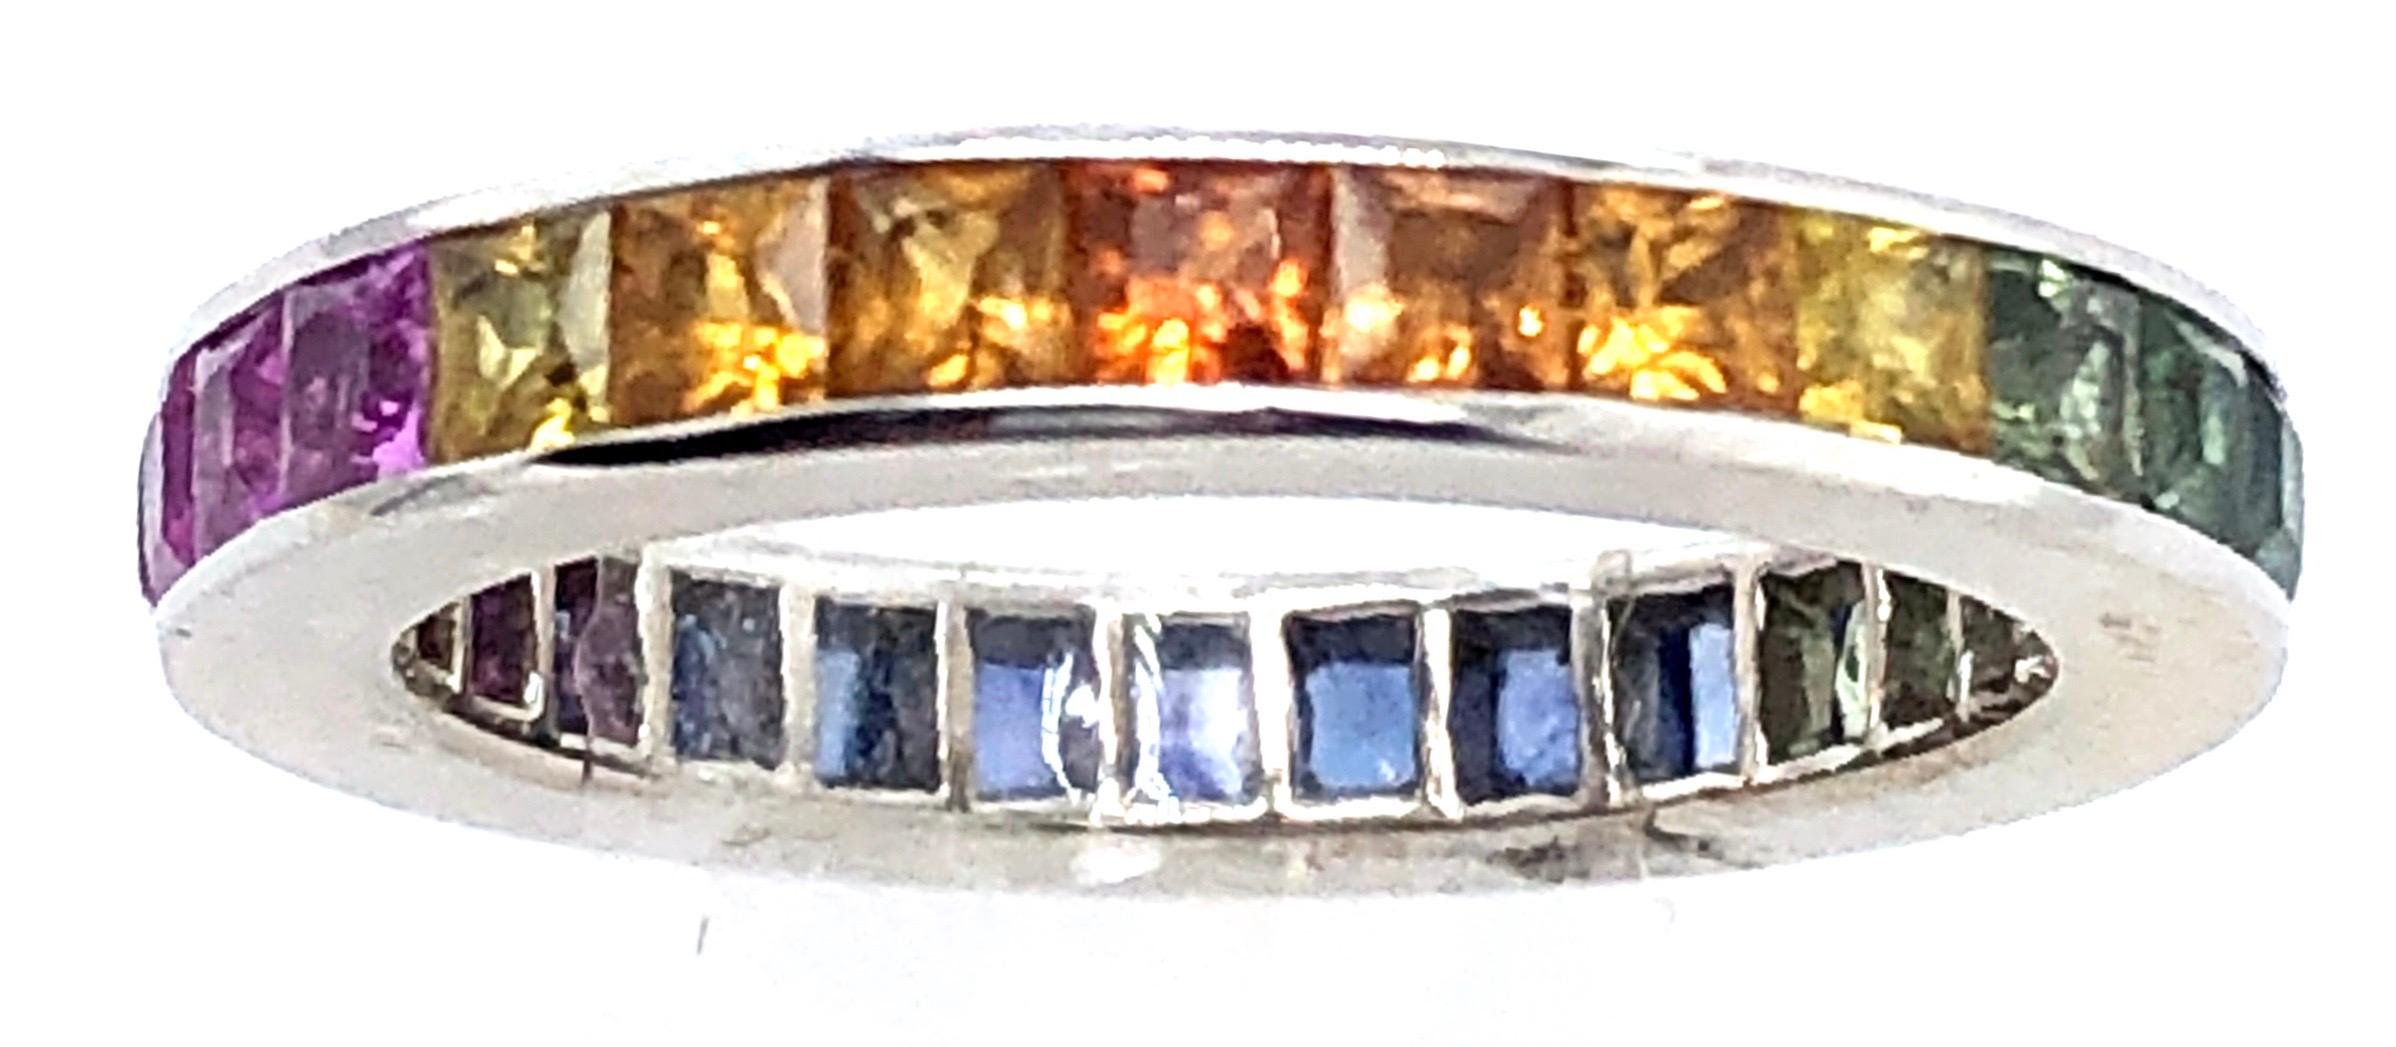 18 Karat White Gold Eternity Band Ring with Semi Precious Stones Size 5.
3.23 grams total weight.
